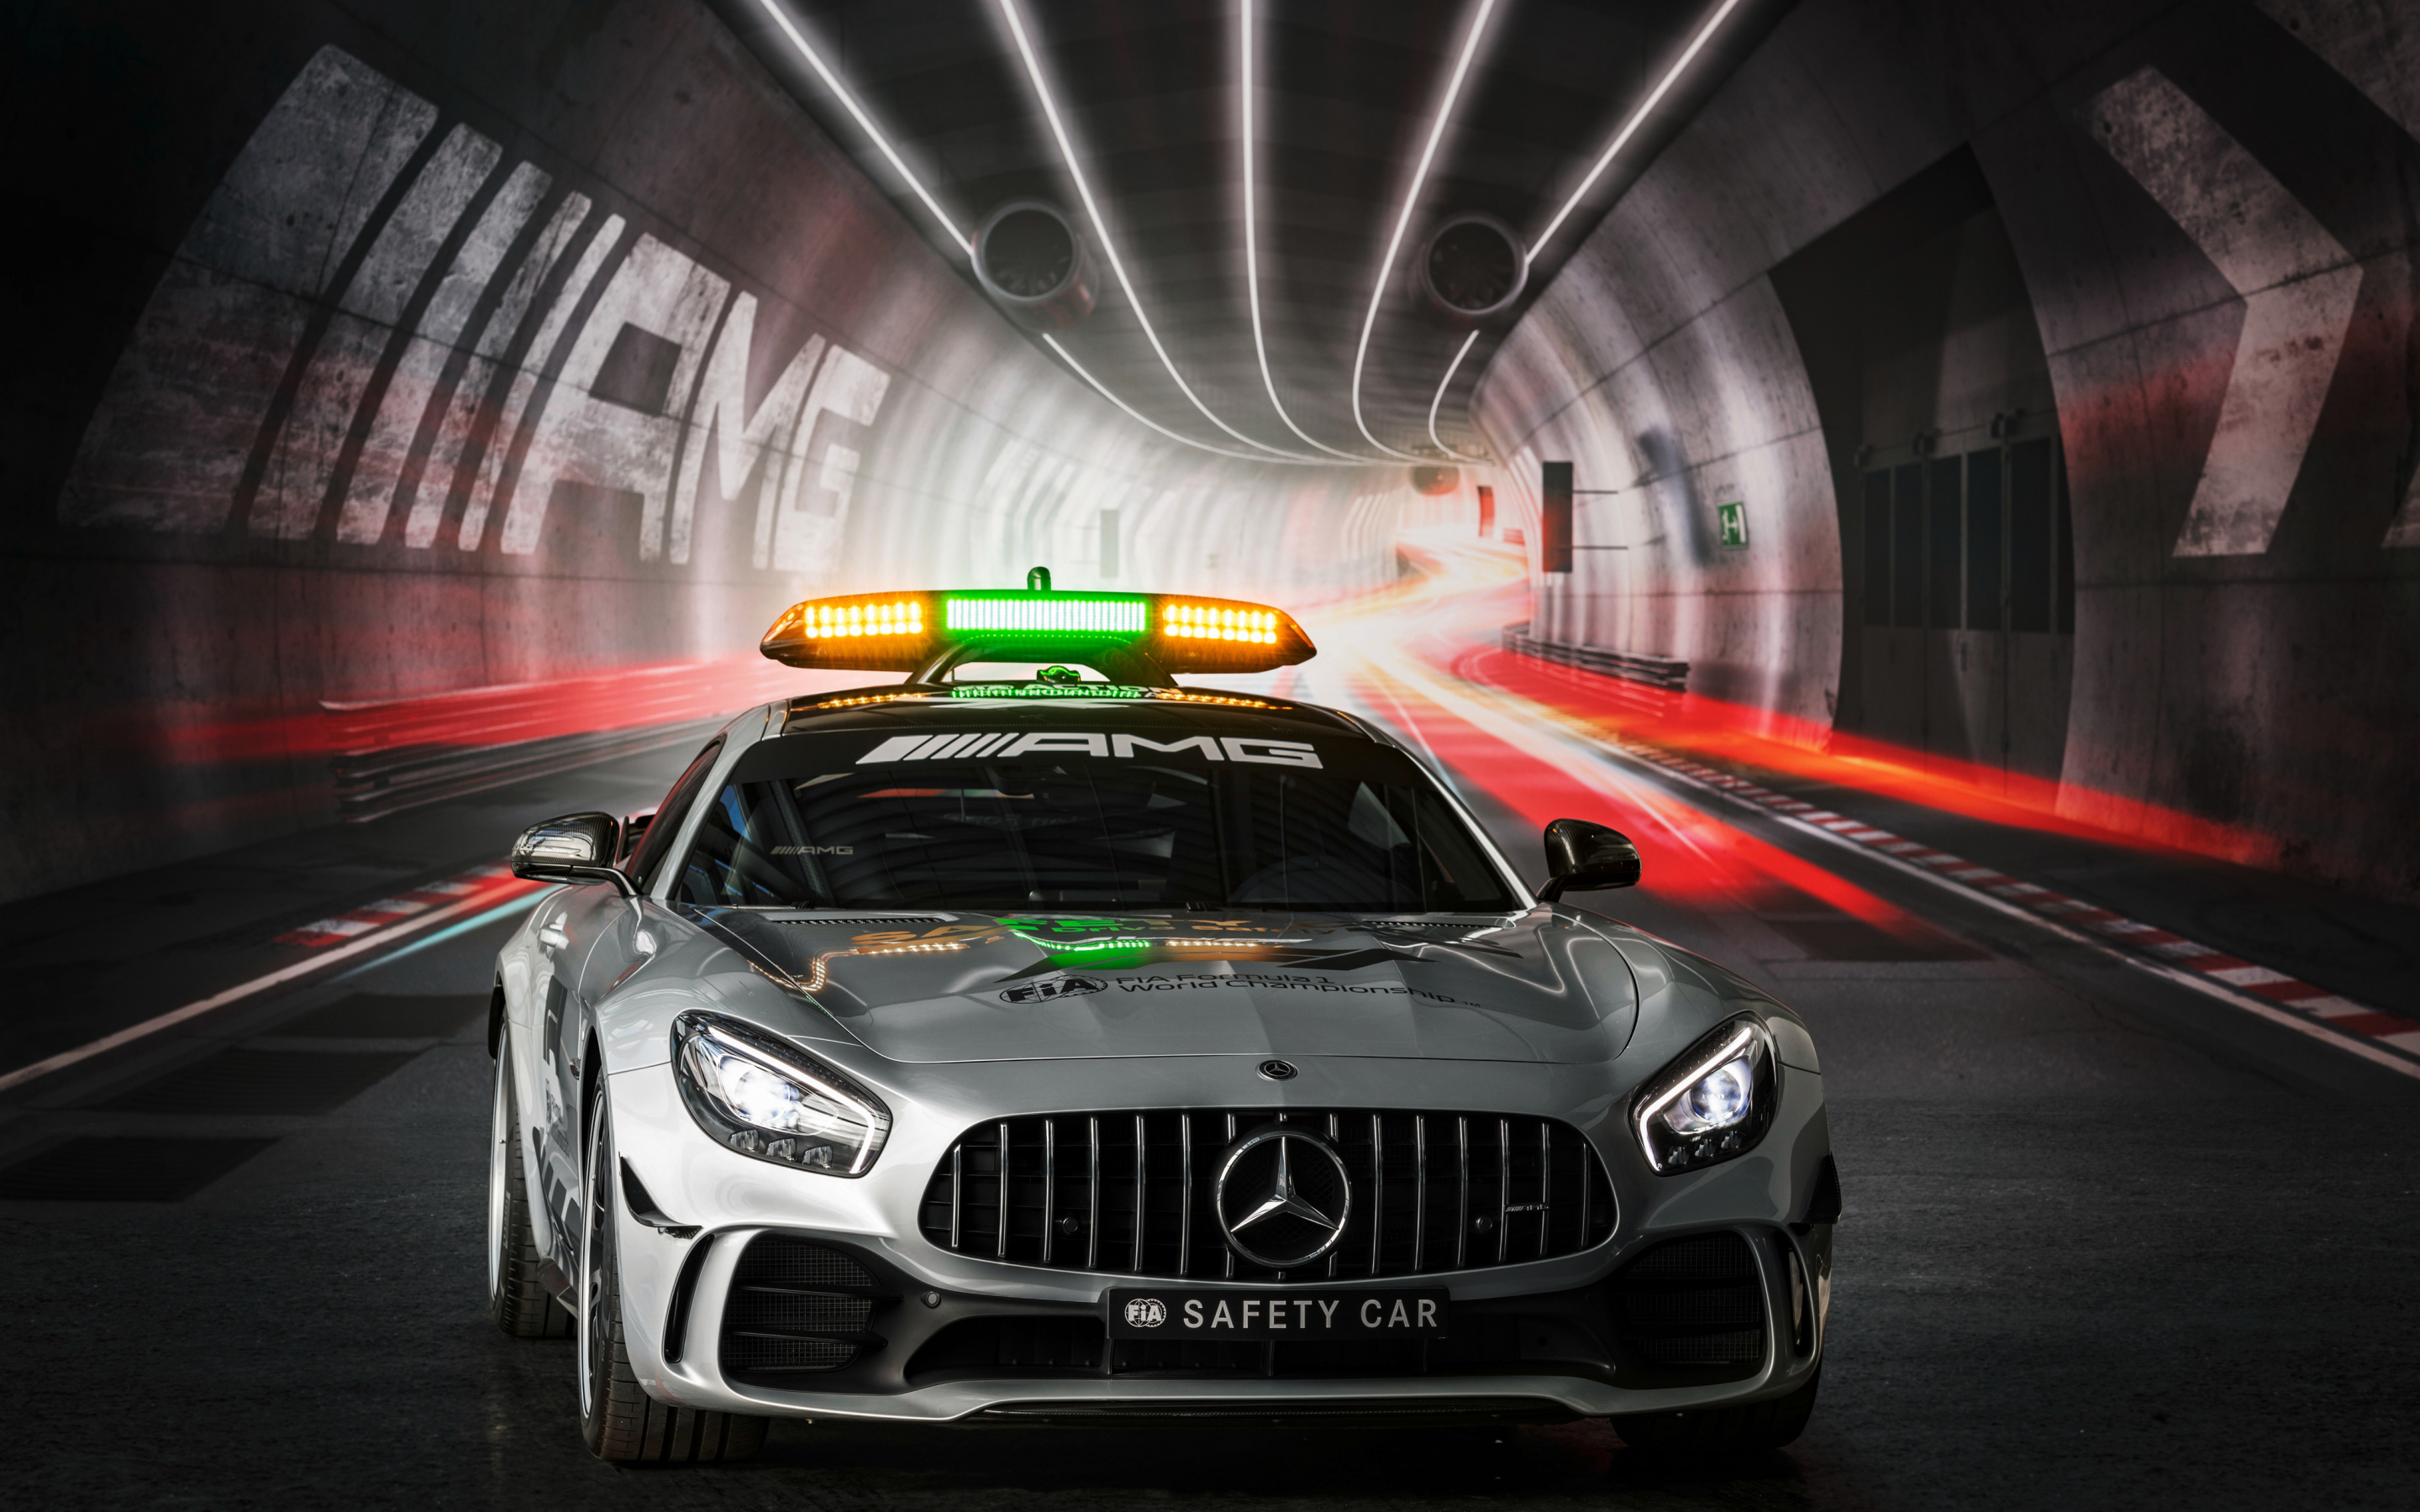 Mercedes-AMG GT R, F1 safety car, front, 2880x1800 wallpaper